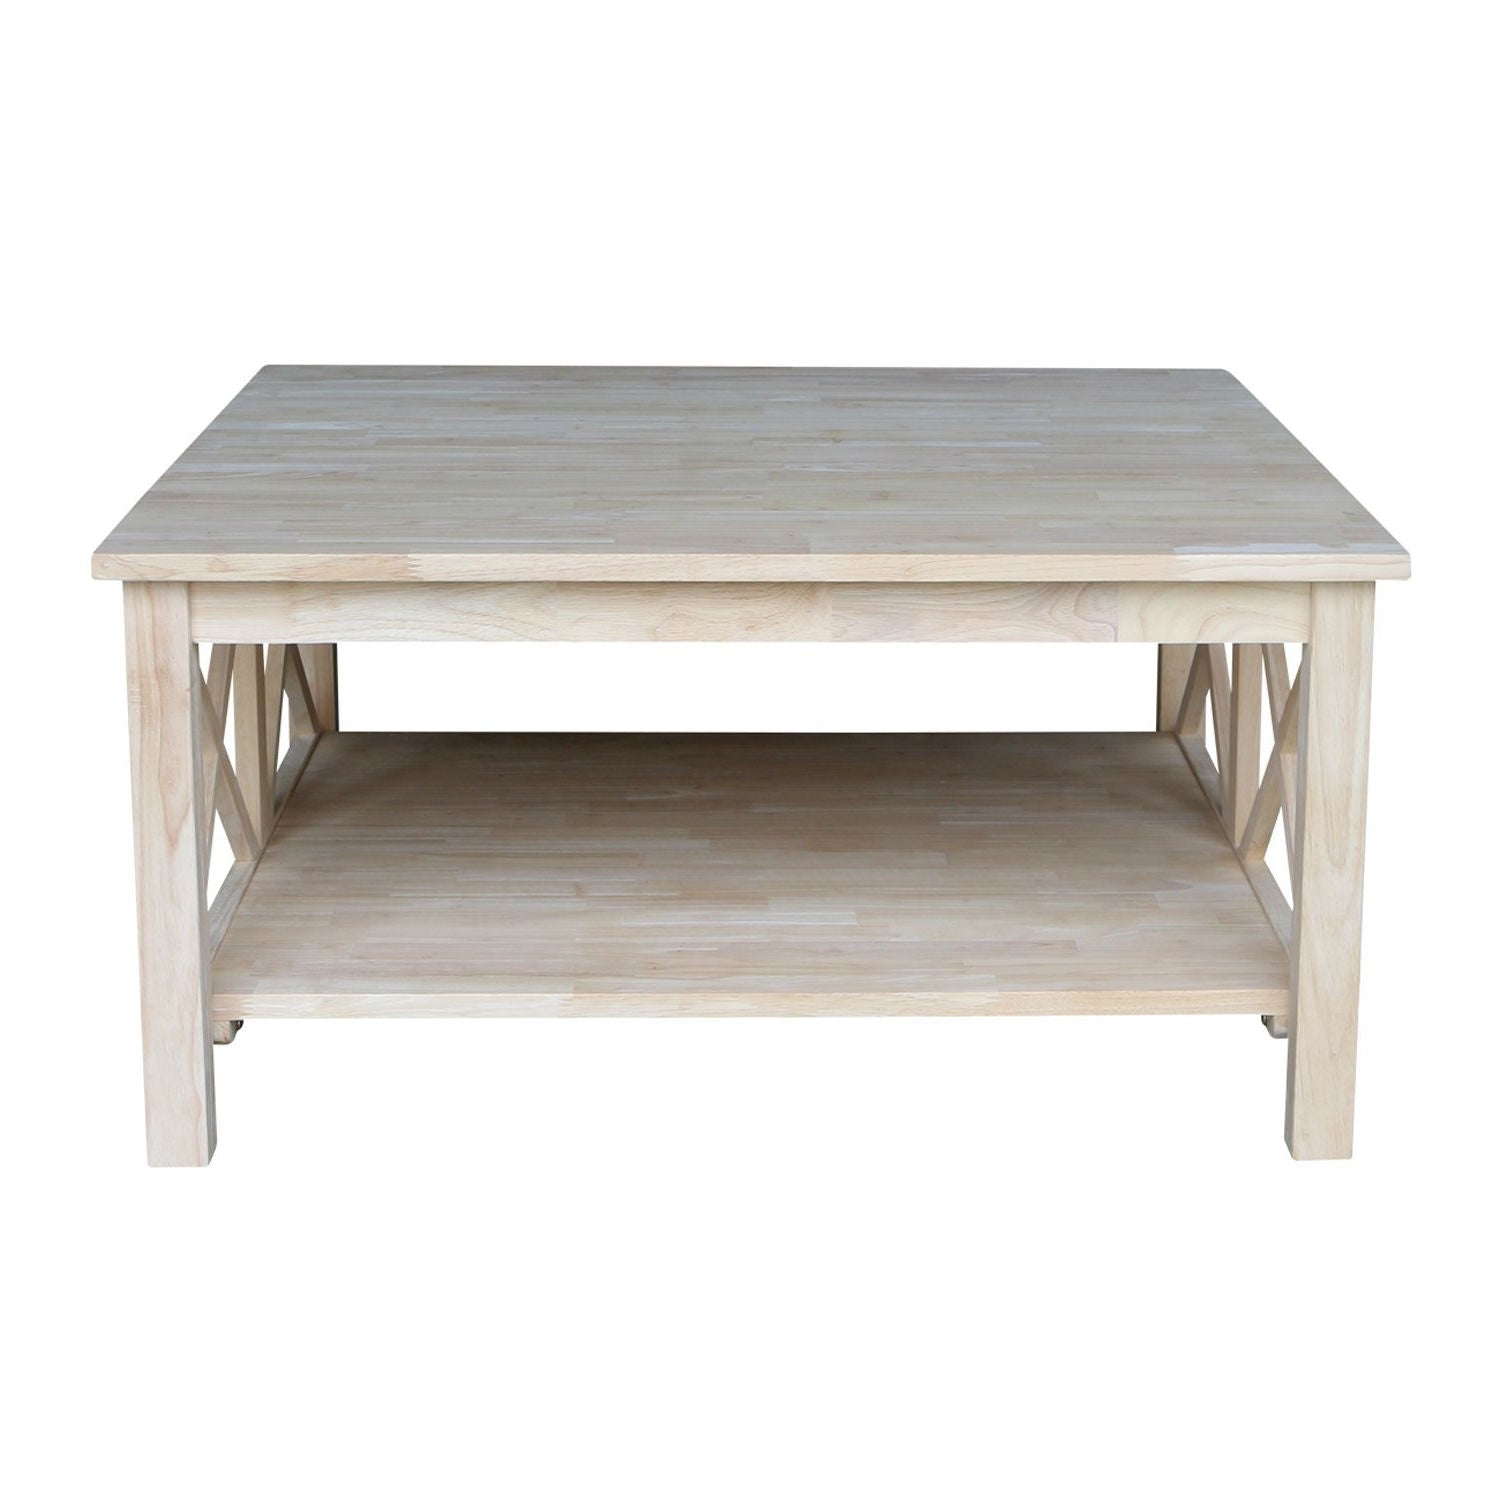 Square Unfinished Solid Wood Coffee Table with Bottom Shelf